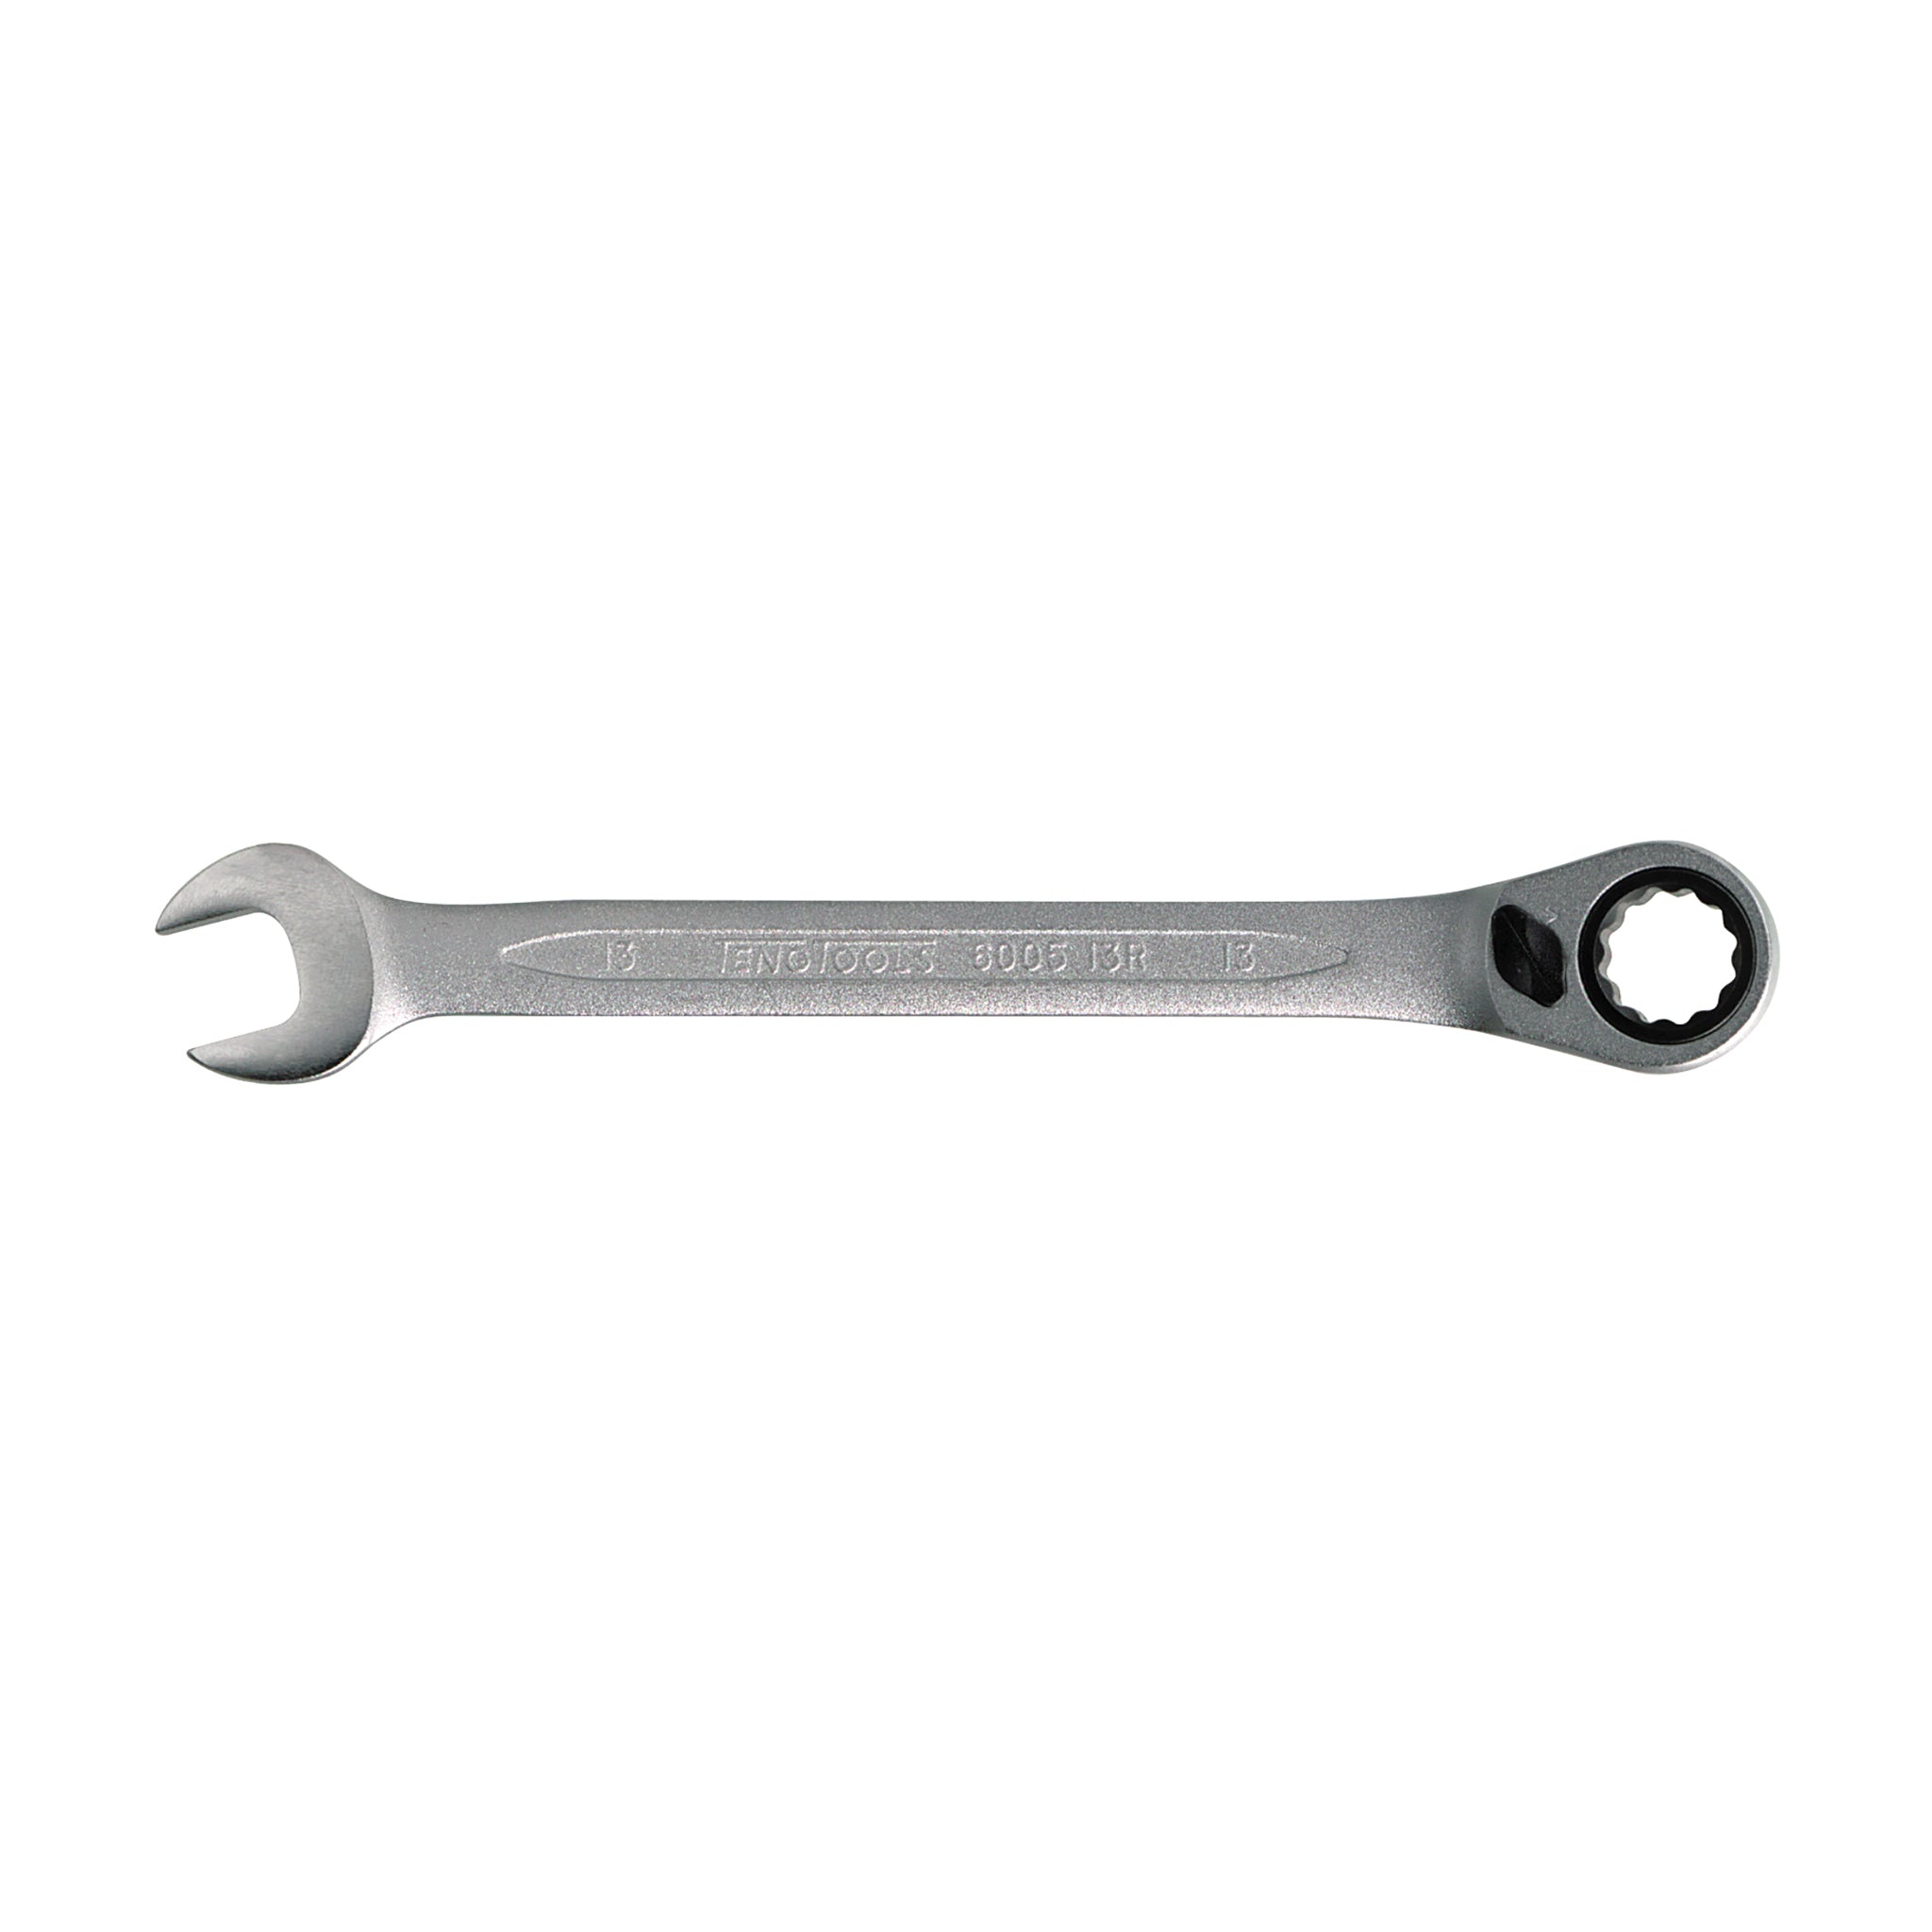 72 Teeth Ratchet Combination Metric Wrenches With Flip Reverse Lever - 24mm